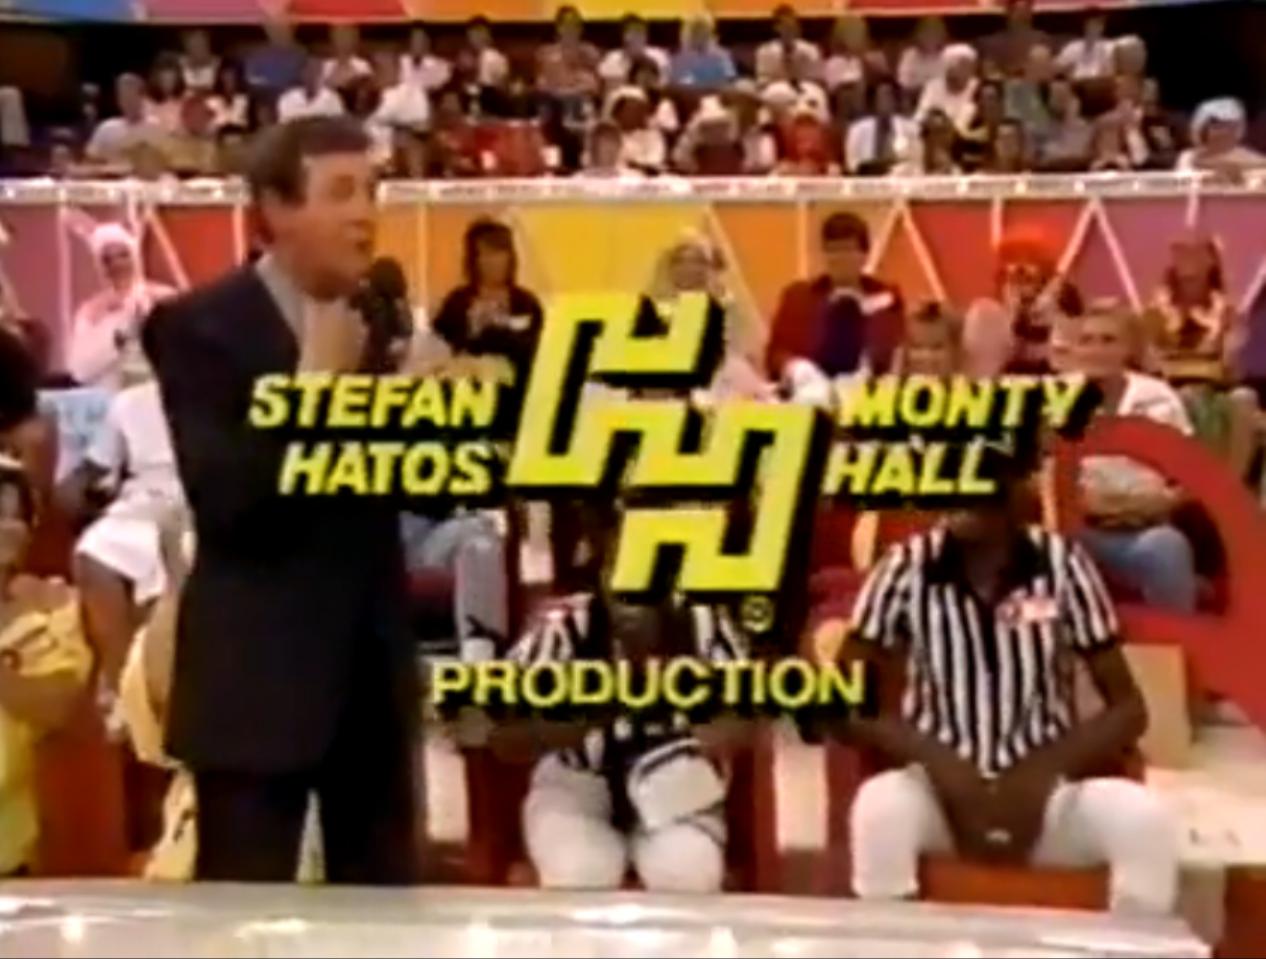 Stefan Hatos-Monty Hall Productions (1980-1986)